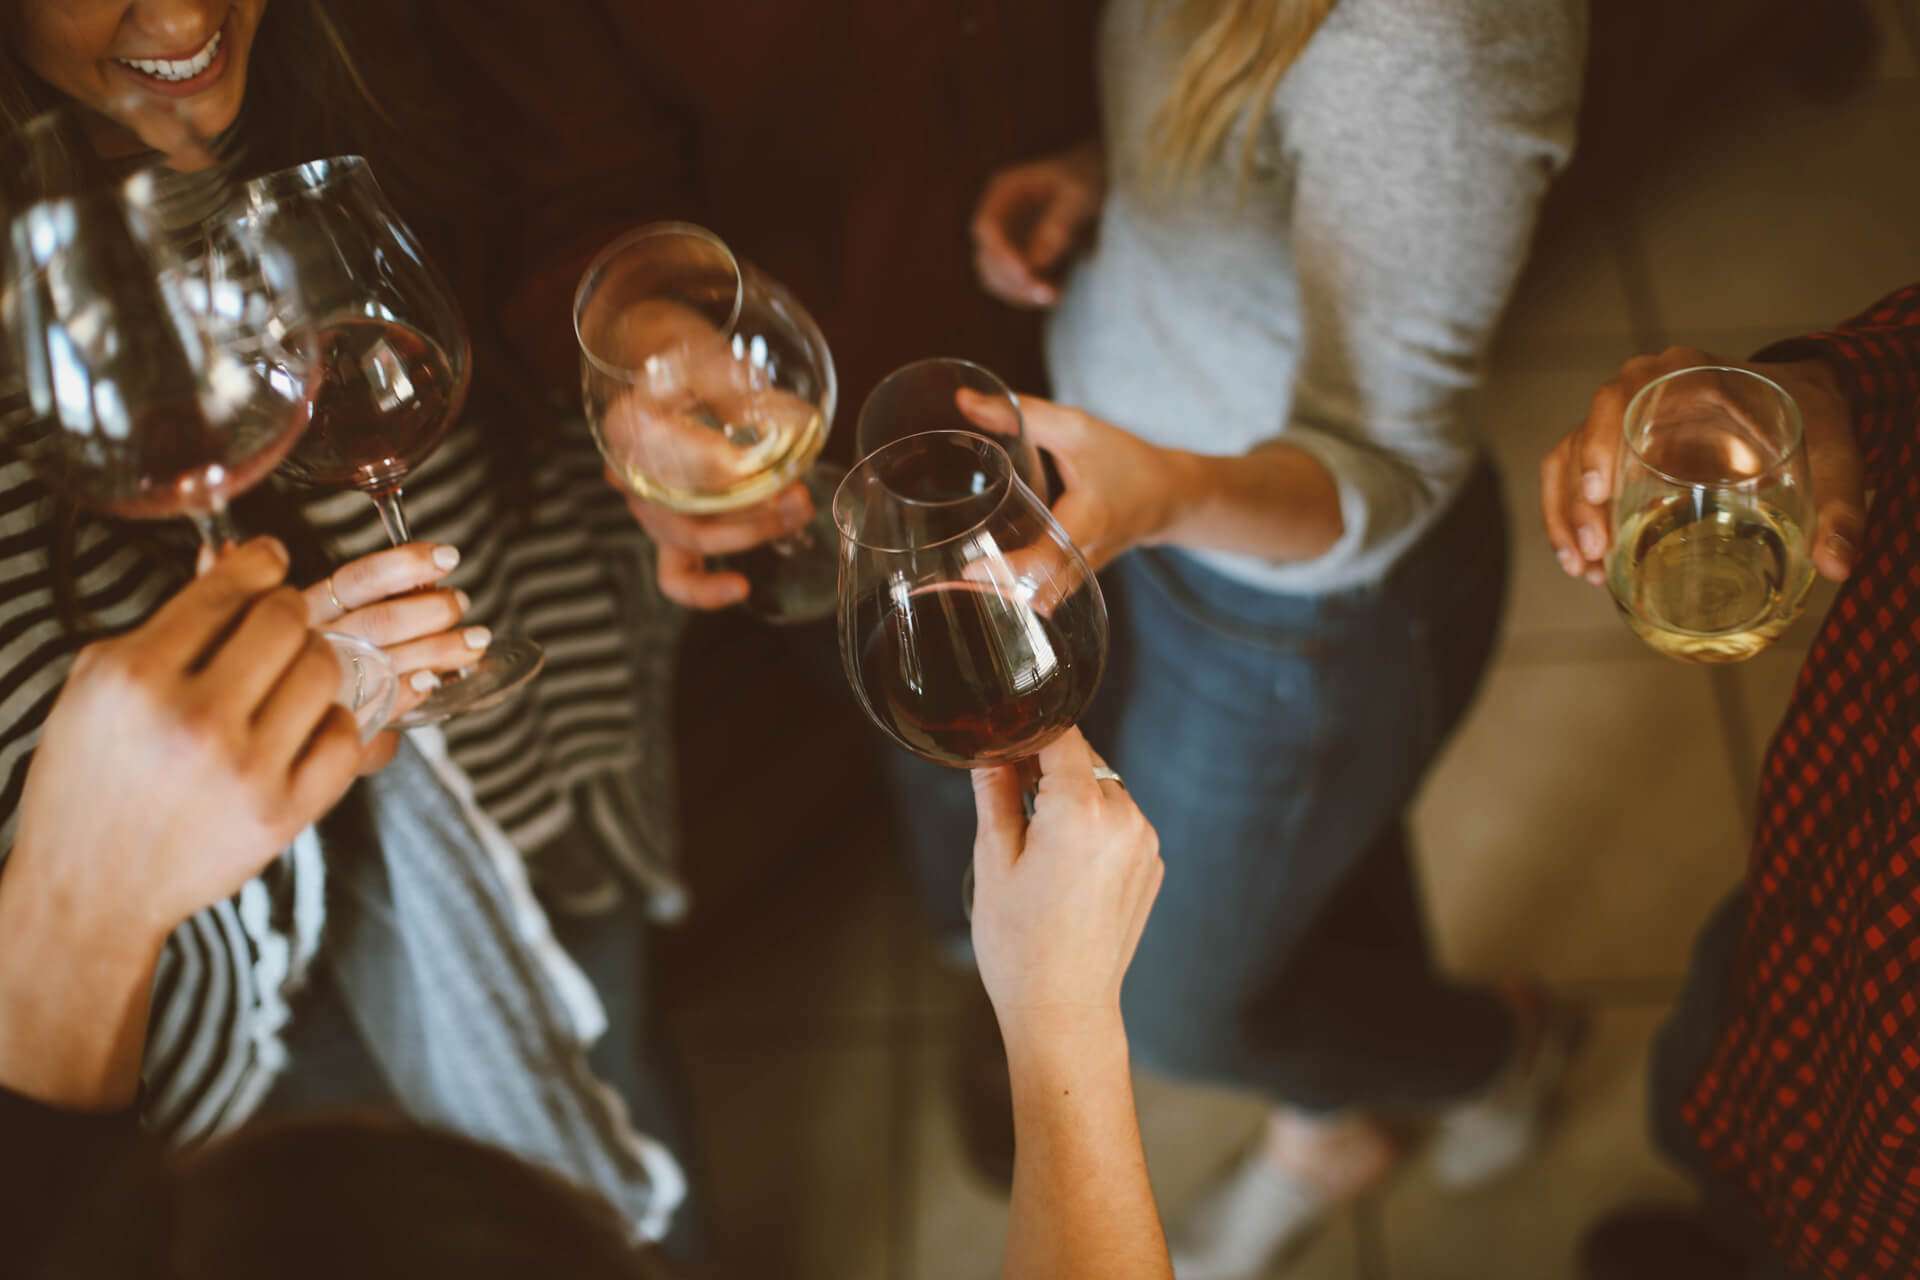 Group of people holding a wine glass with red and white wine